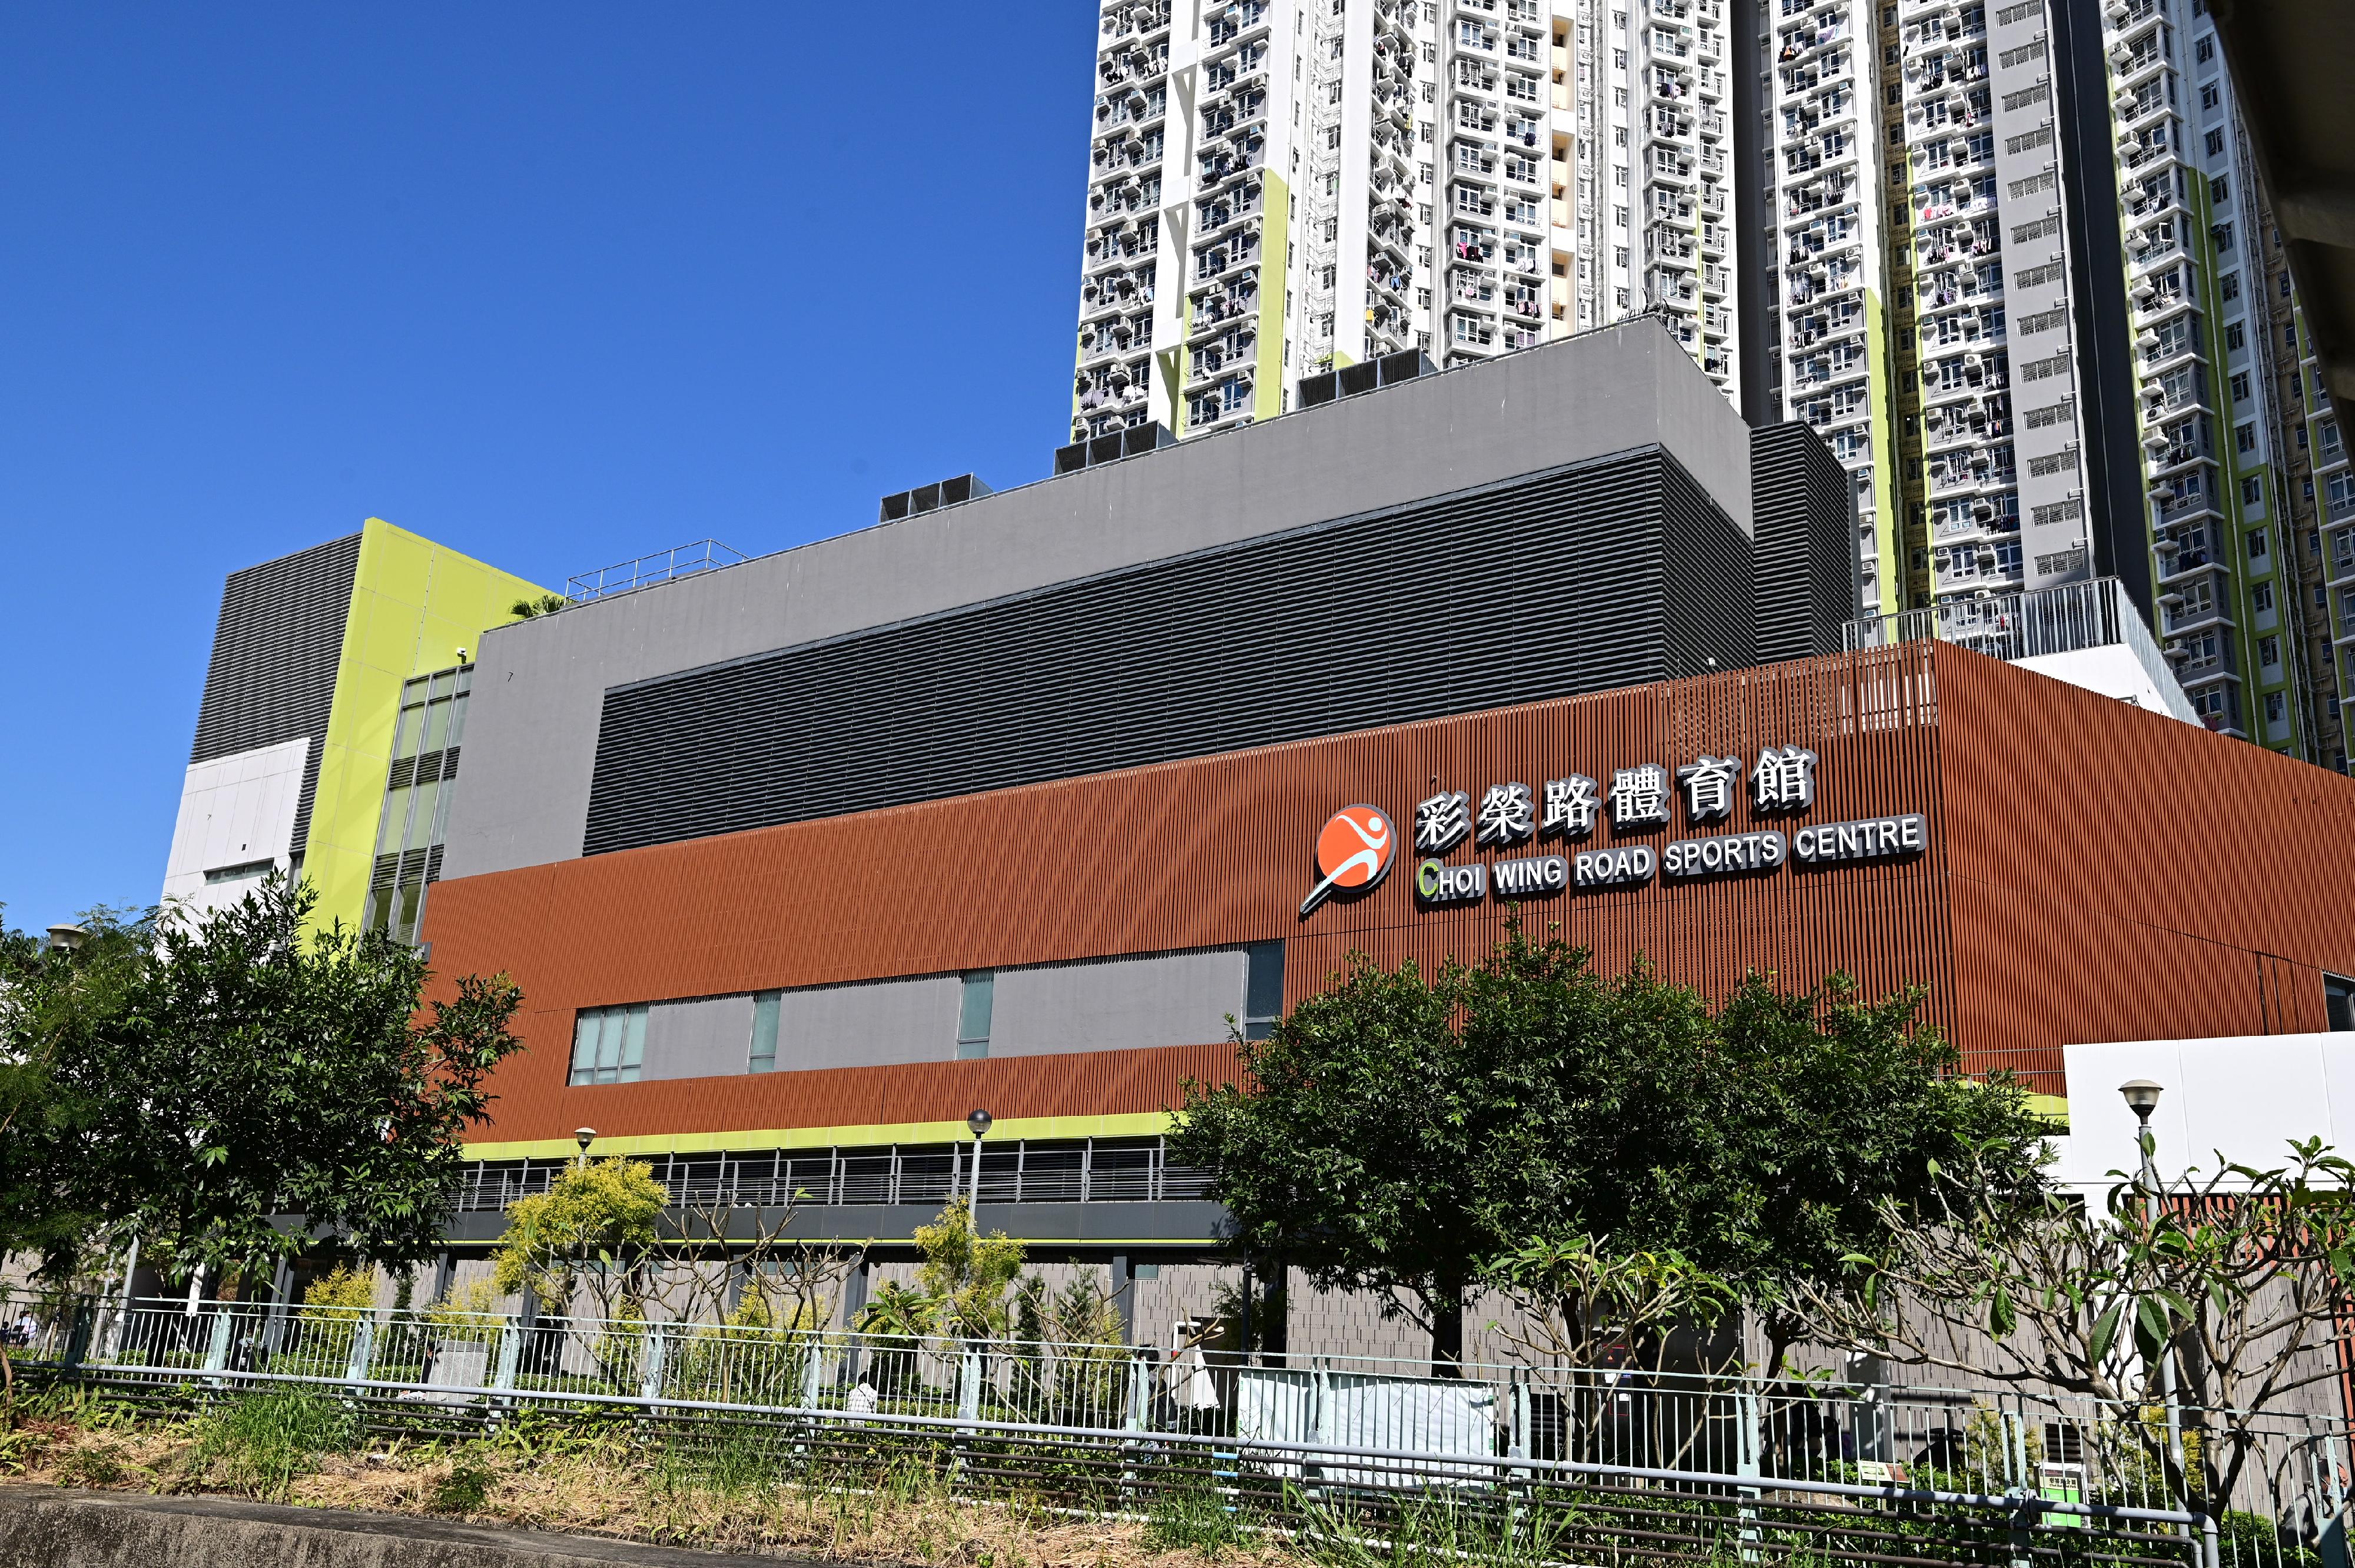 Choi Wing Road Sports Centre, managed by the Leisure and Cultural Services Department (LCSD), will open for public use on December 29 (Wednesday). It is the ninth indoor sports centre under the LCSD in Kwun Tong District, and provides a wide range of leisure and sports facilities.